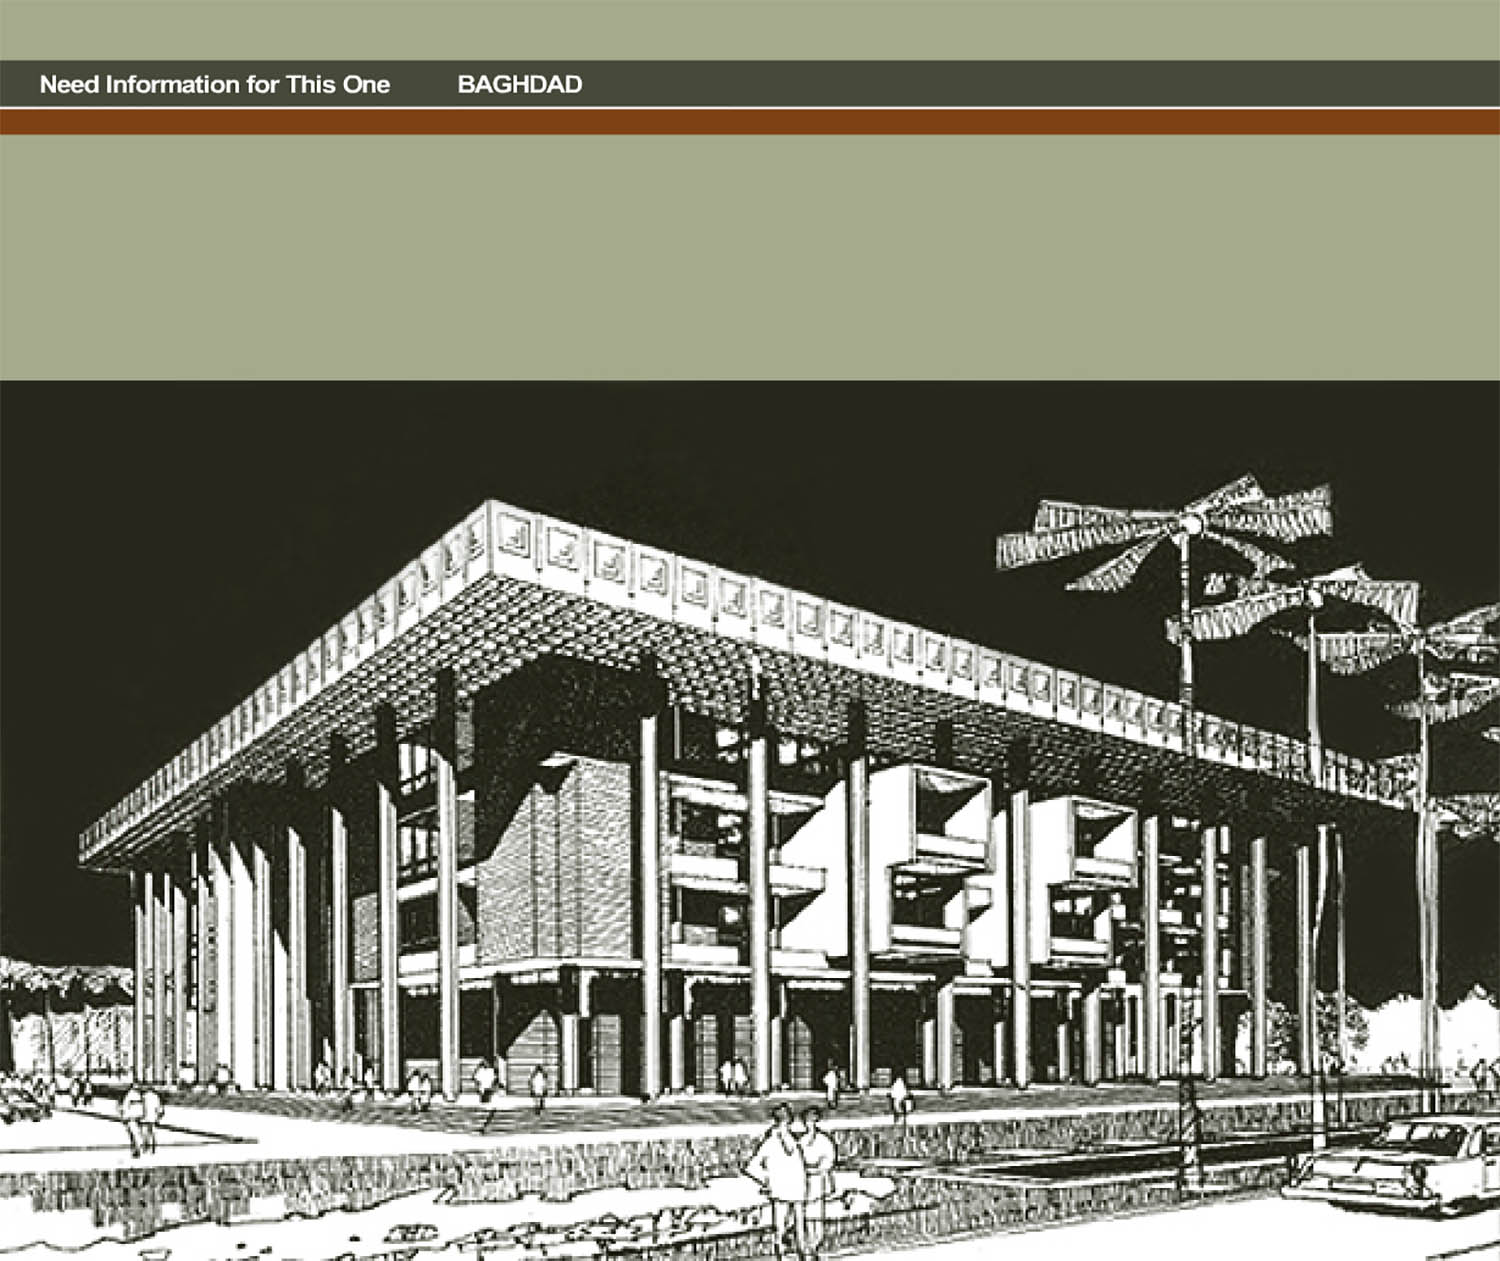 Digital image from the project gallery on the website of Hisham Munir, showing an architectural rendering of the exterior of the Baghdad Guest House. 